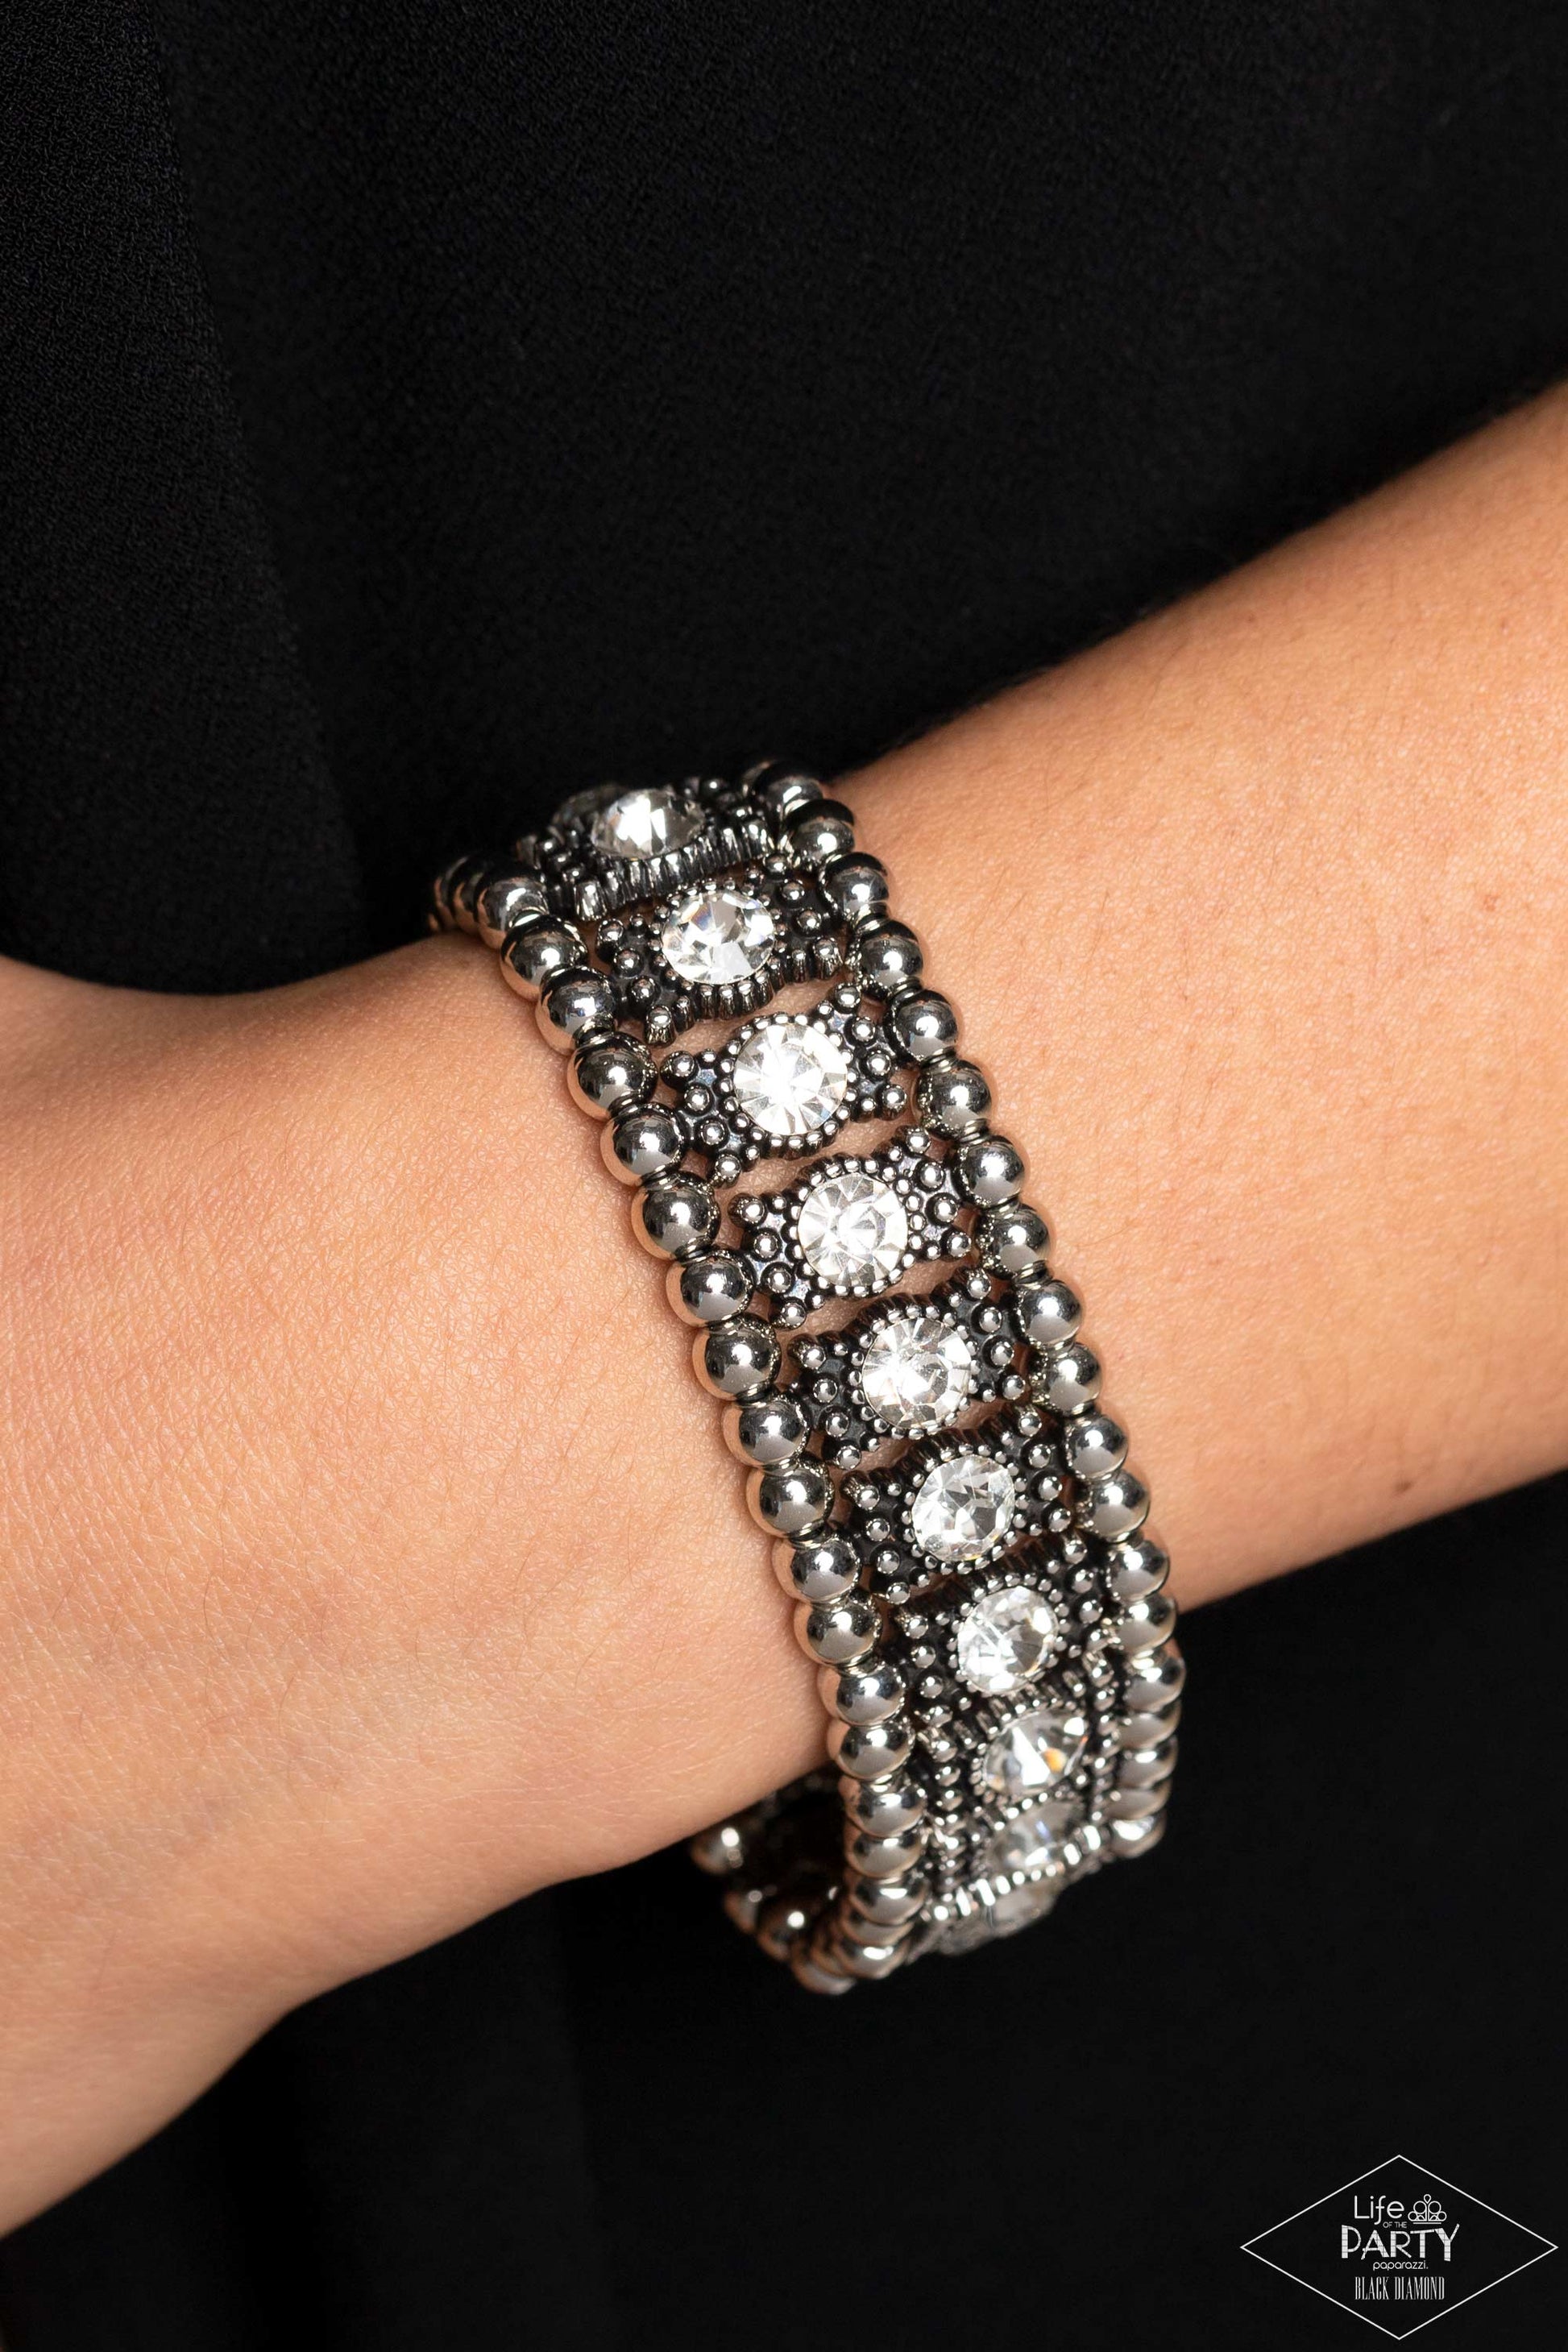 Ritzy Reboot White Bracelet - Paparazzi Accessories  A dazzling row of sparkling white rhinestones set in dotted frames is bordered by a row of dainty antiqued silver studs. Shiny round silver beads form the outermost border of this luxuriously layered design, which is threaded along stretchy bands for an upscale edgy look. P9ED-WTXX-034EE This Black Diamond Encore is back in the spotlight at the request of our 2022 Life of the Party member with Black Diamond Access, Tracey G.